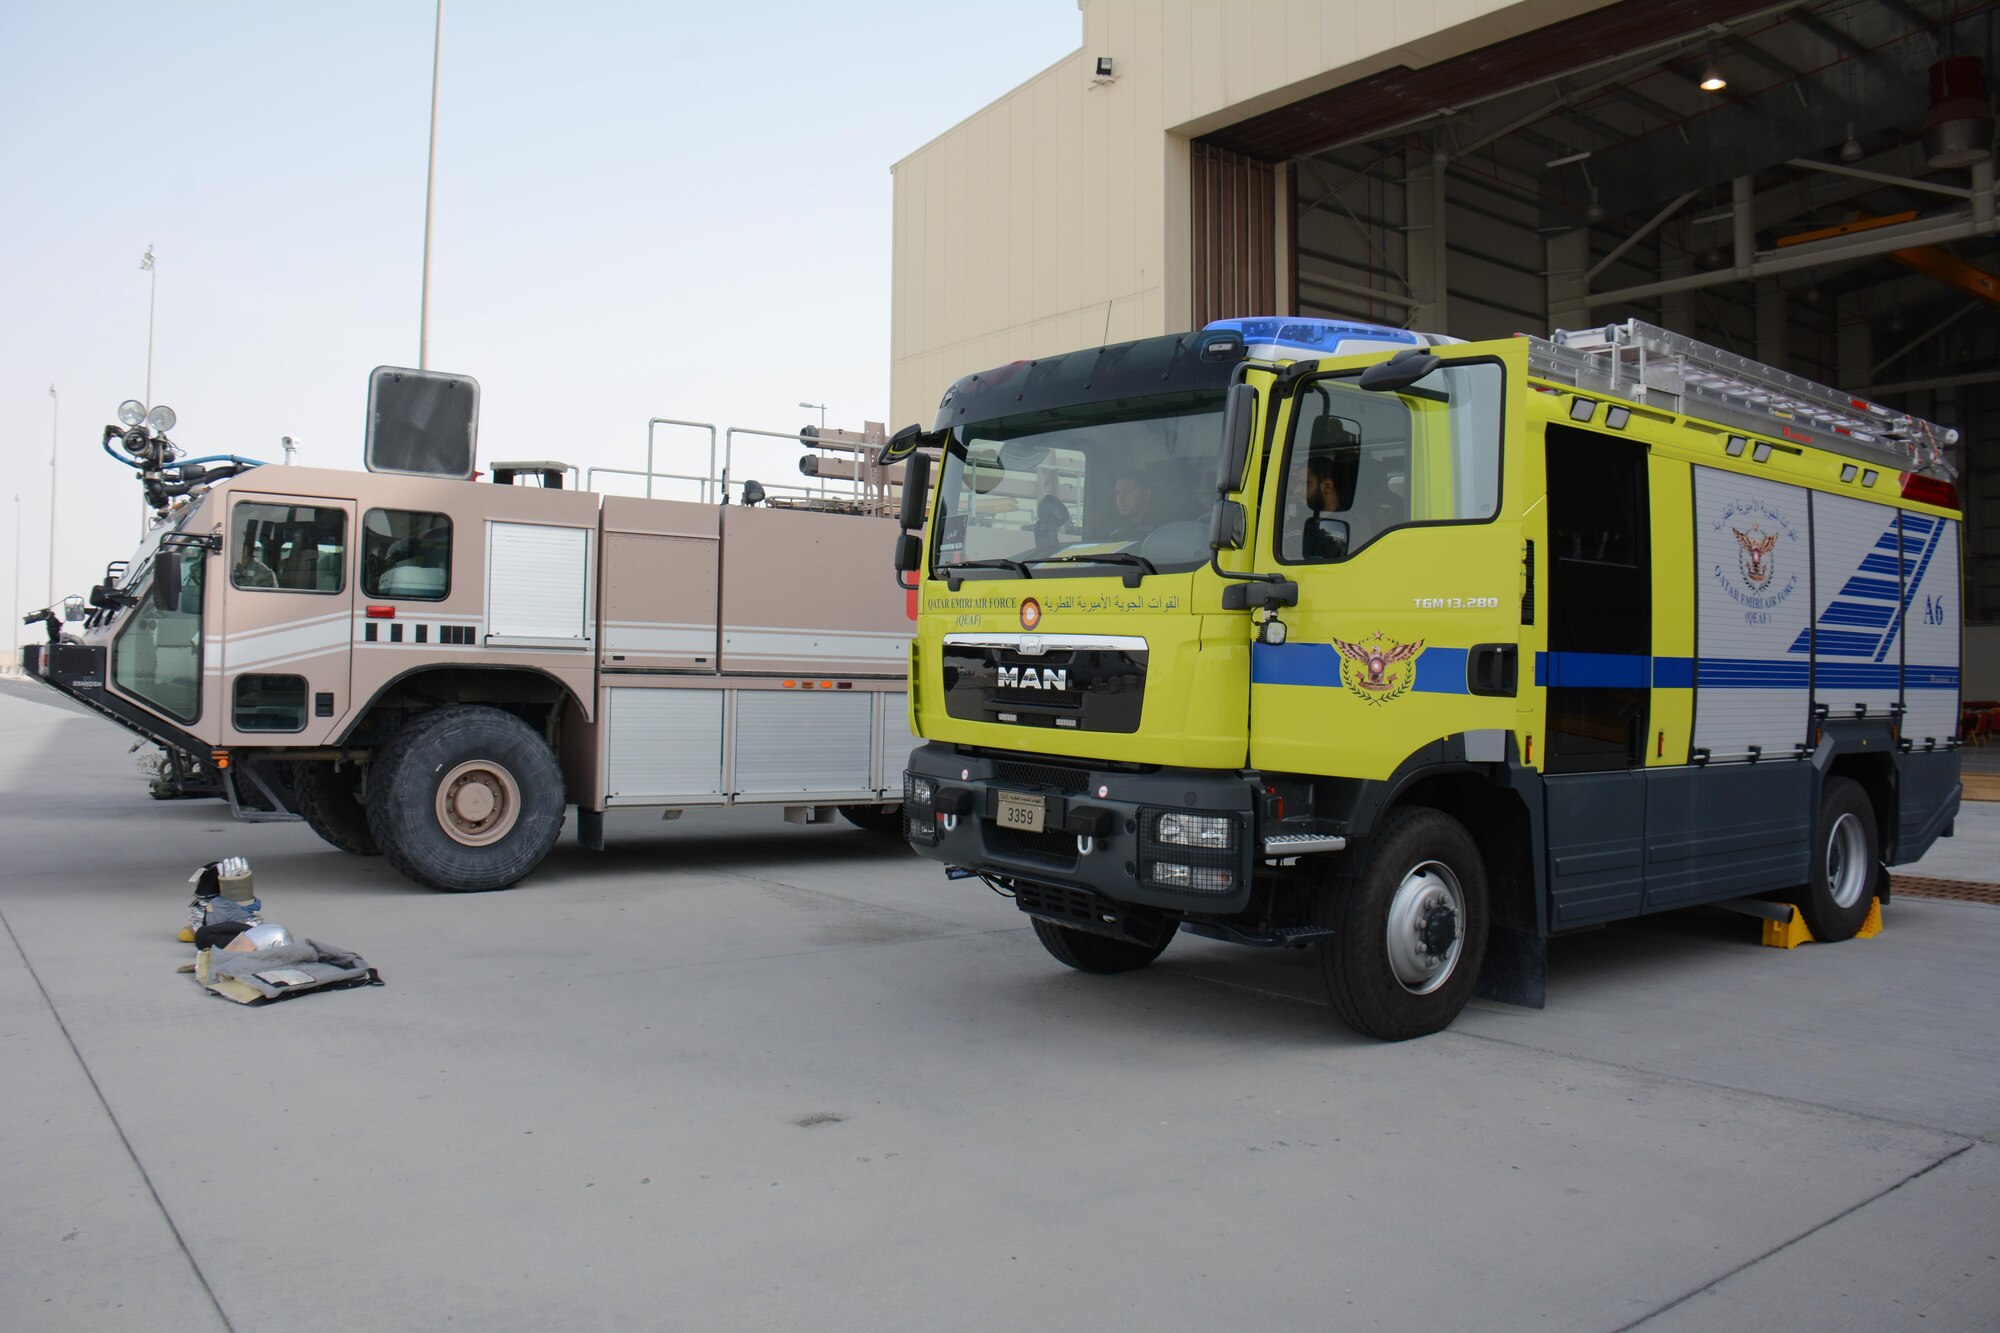 Fire trucks from the Qatar Emiri Air Force and U.S. Air Force wait for visitors at the annual Flight Line Fest Jan. 10 at Al Udeid Air Base, Qatar. The vehicles were part of an emergency vehicle display, which also featured mine resistant ambush protectant vehicles. Nine aircraft including the B-1B Lancer and KC-135 Stratotanker were also on display. Flight Line Fest is a joint partnership between the 379th Air Expeditionary Wing and QEAF held to foster relations between Qatar and the United States. (U.S. Air Force photo by Tech. Sgt. James Hodgman/Released)